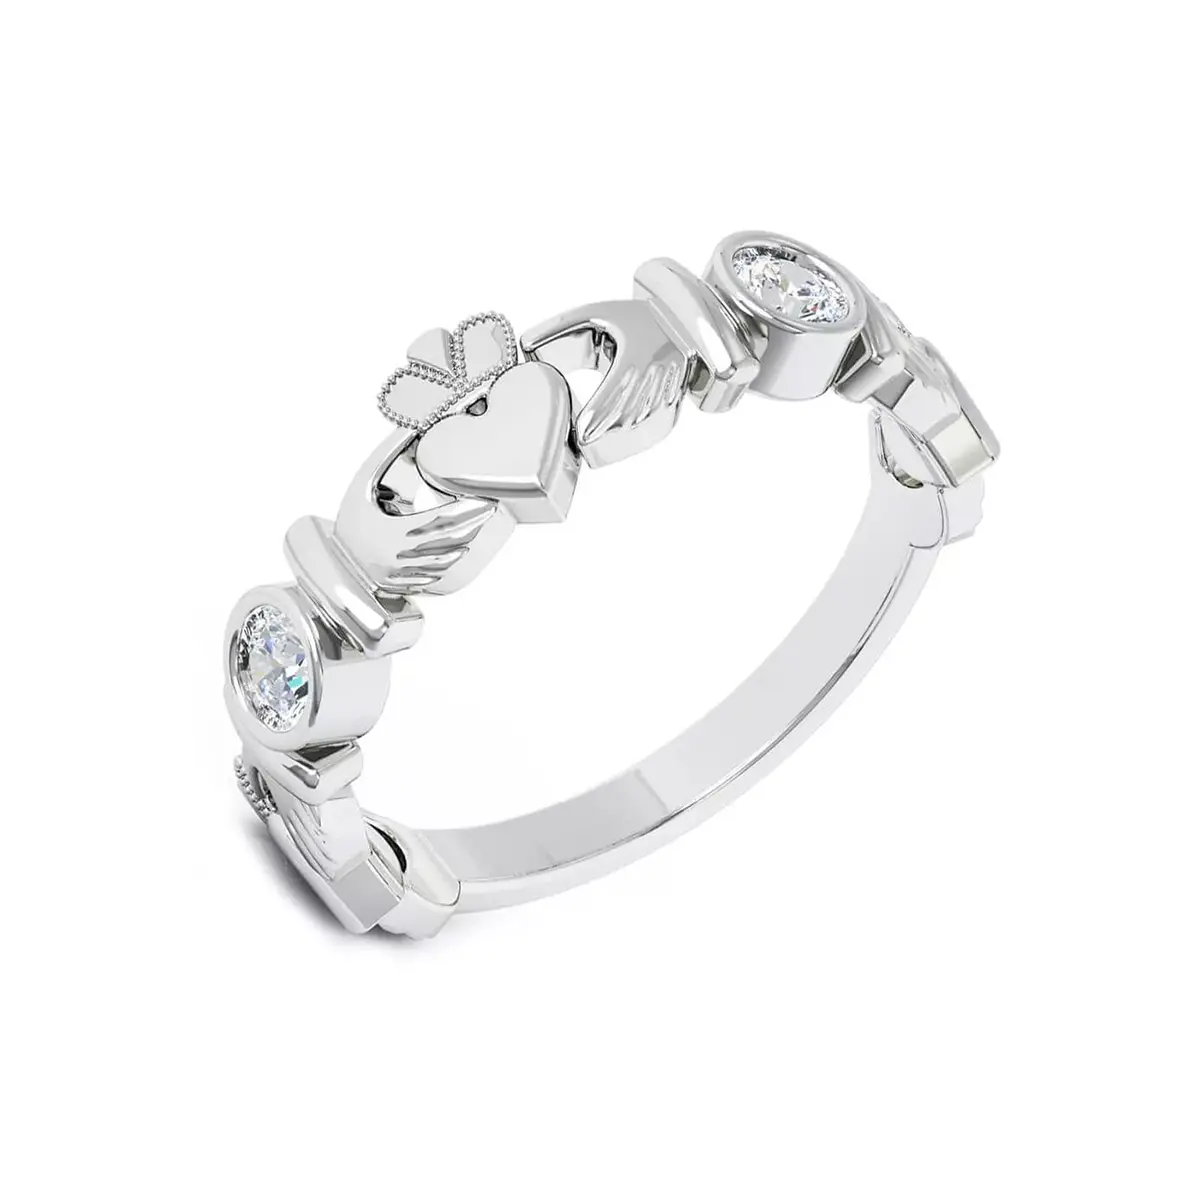 White Gold Claddagh Ring And Diamond